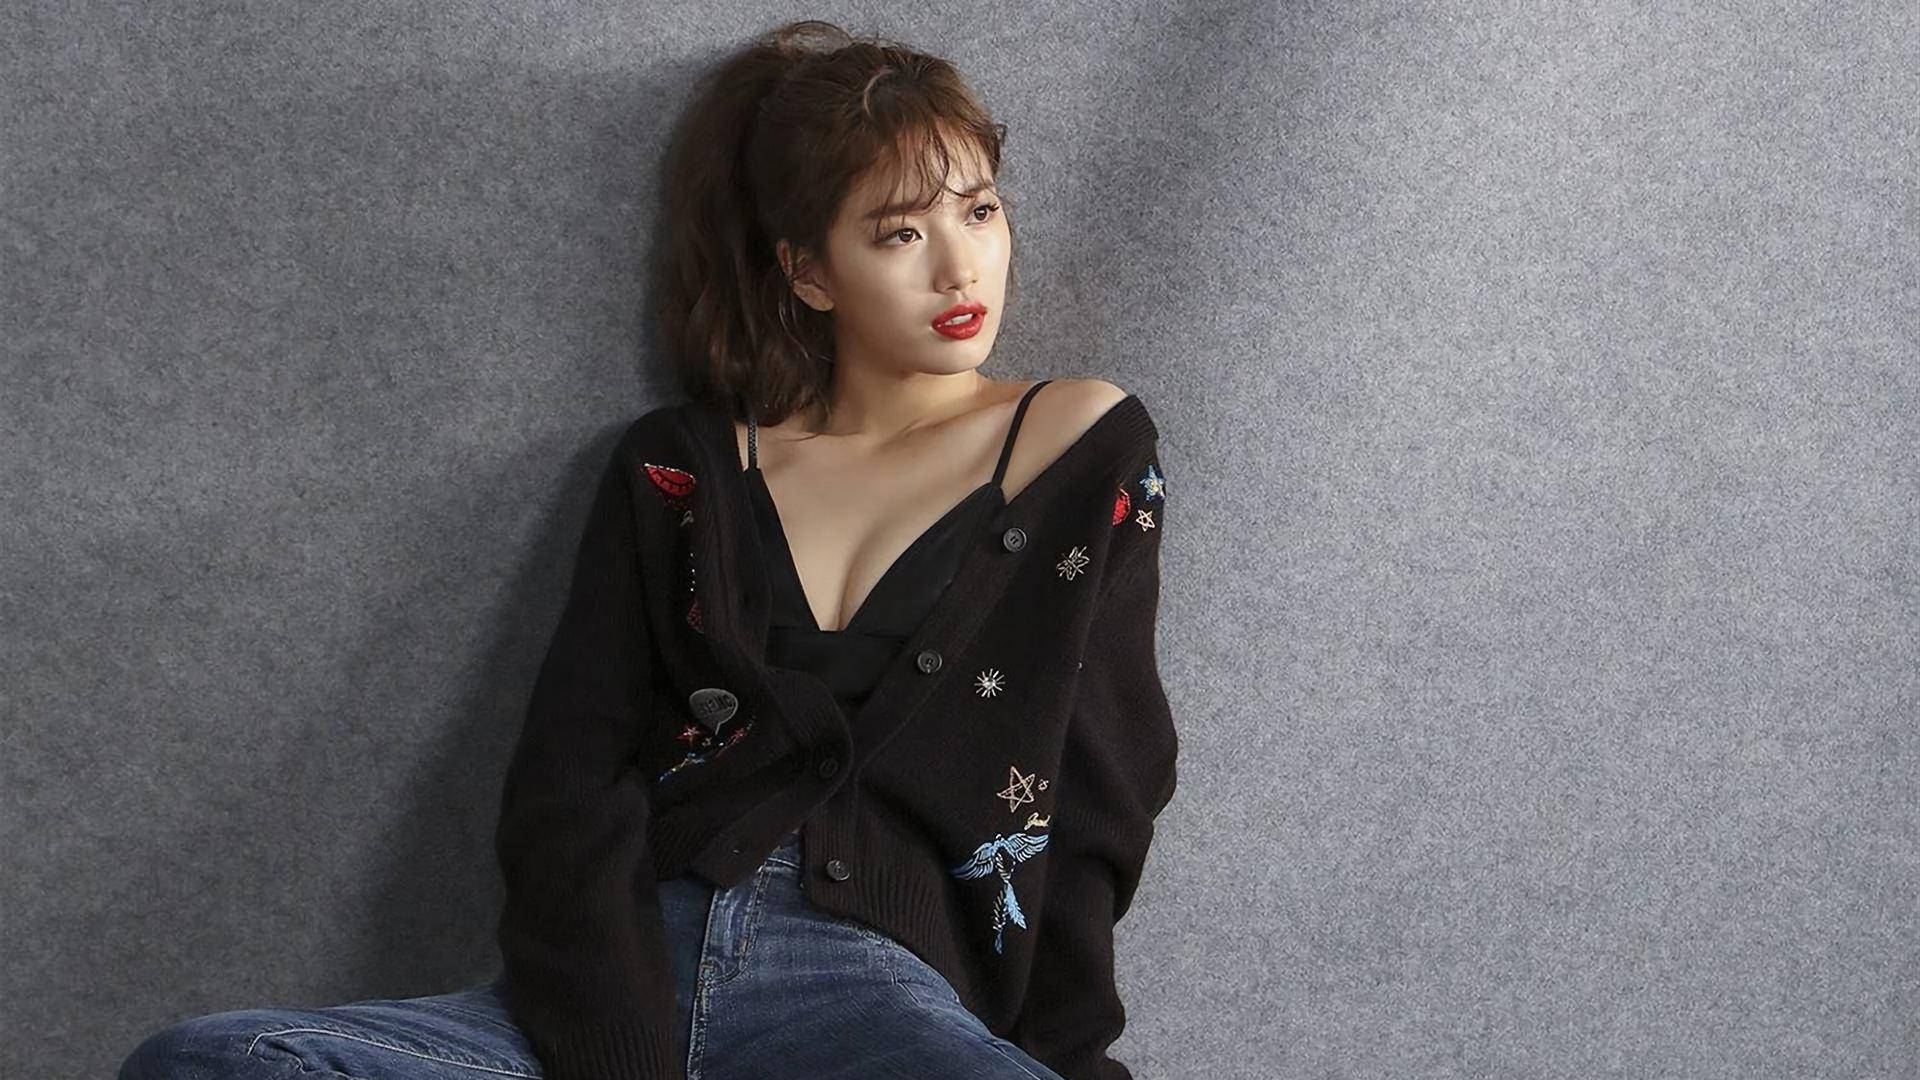 Bae Suzy Black Outfit Wallpaper